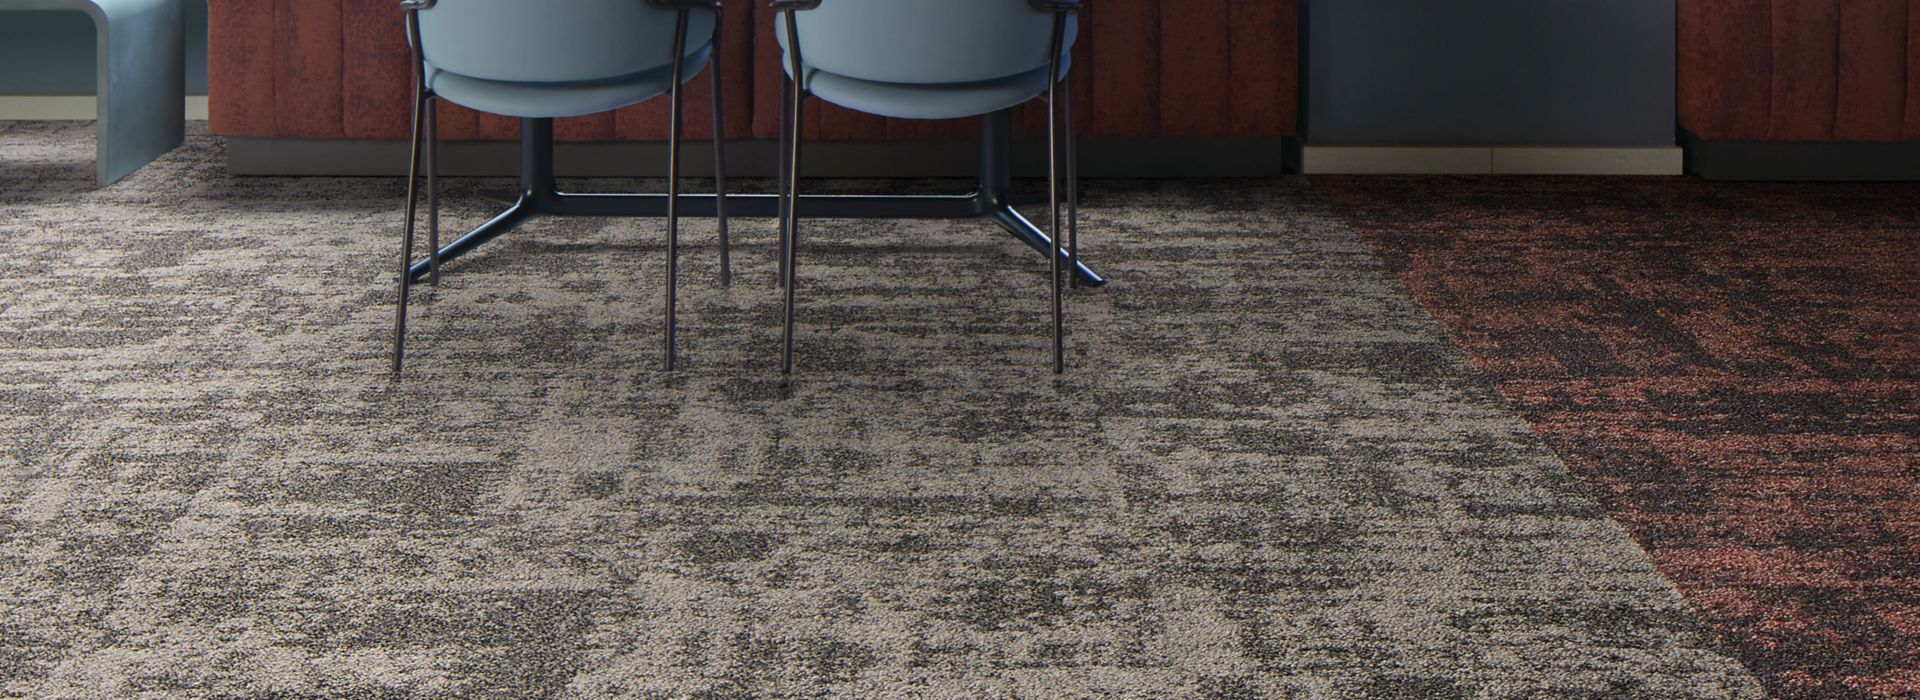 Interface Stunt Double carpet tile in dining area with table and chairs numéro d’image 2